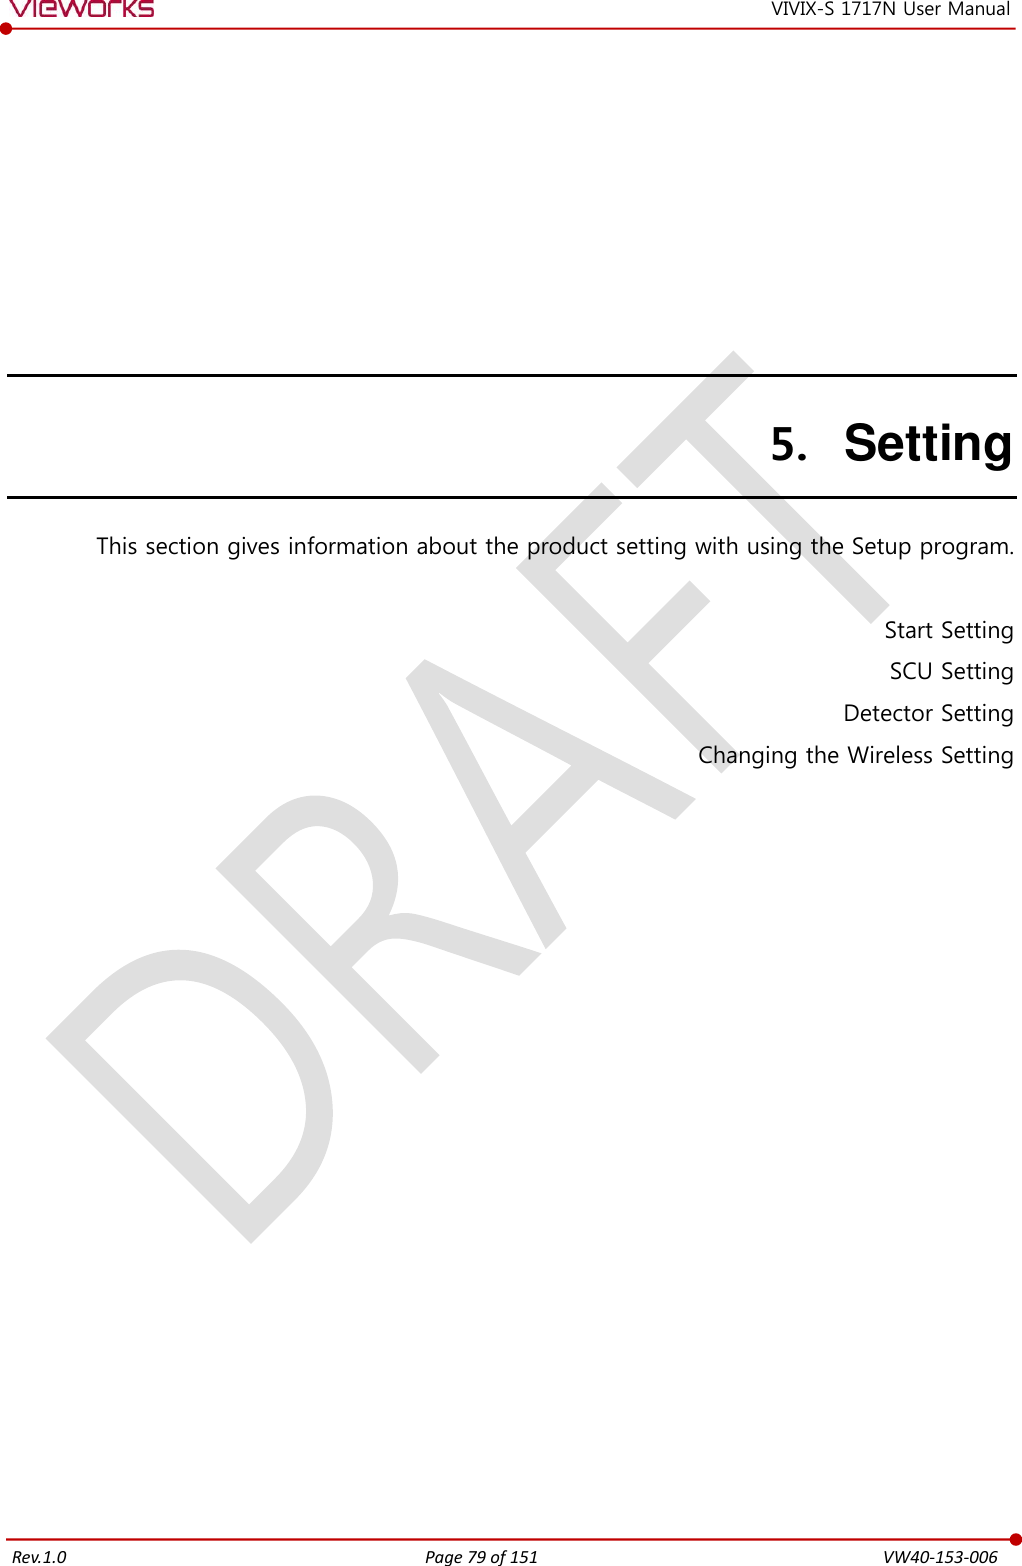   Rev.1.0 Page 79 of 151  VW40-153-006 VIVIX-S 1717N User Manual 5. Setting This section gives information about the product setting with using the Setup program.  Start Setting SCU Setting Detector Setting Changing the Wireless Setting   